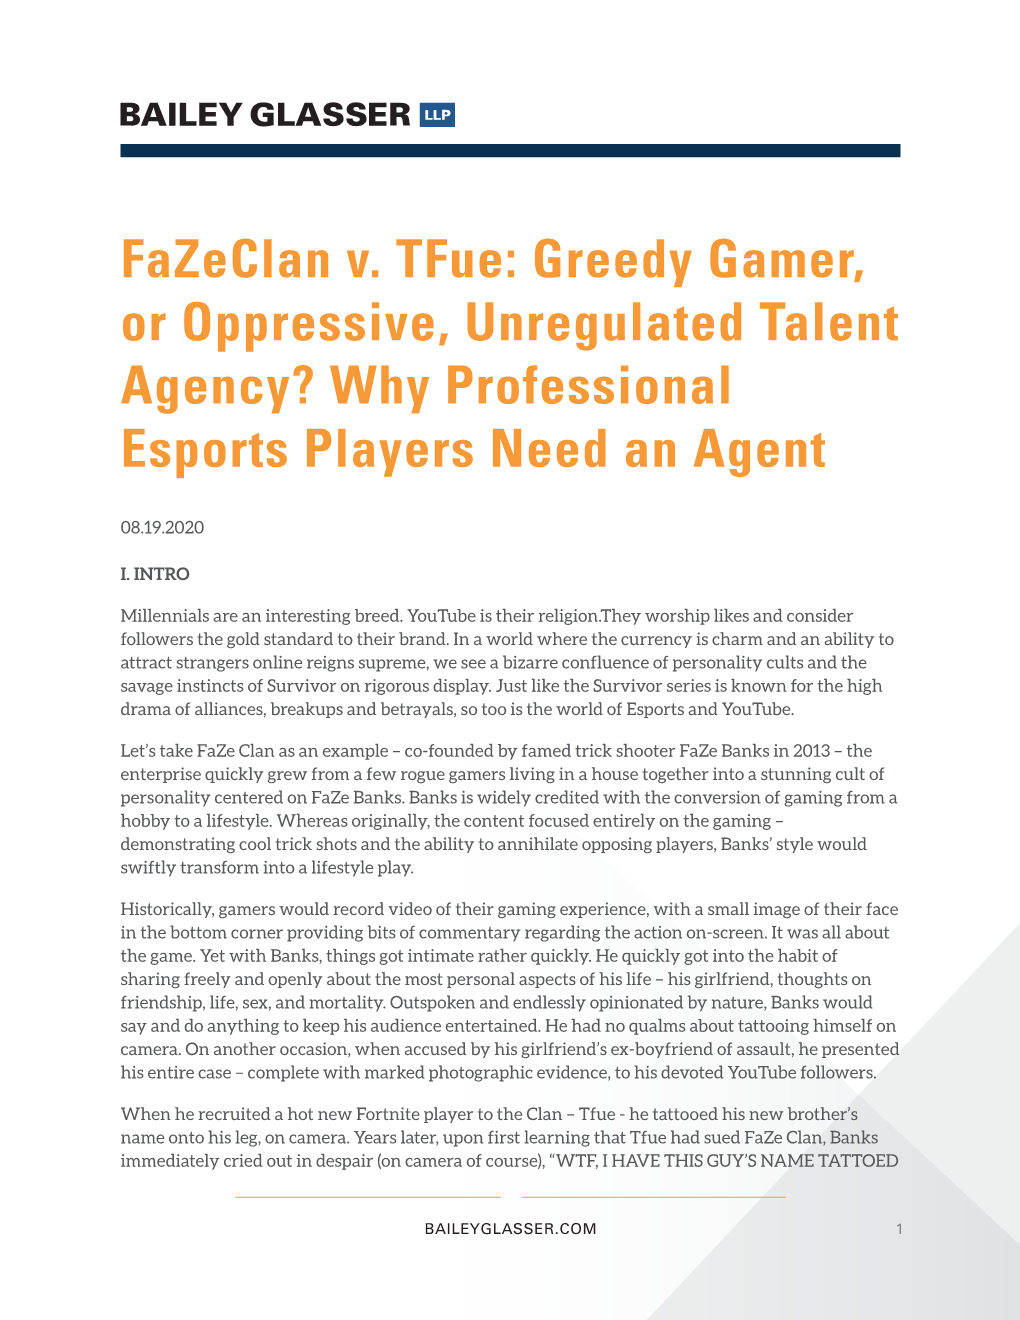 Fazeclan V. Tfue: Greedy Gamer, Or Oppressive, Unregulated Talent Agency? Why Professional Esports Players Need an Agent